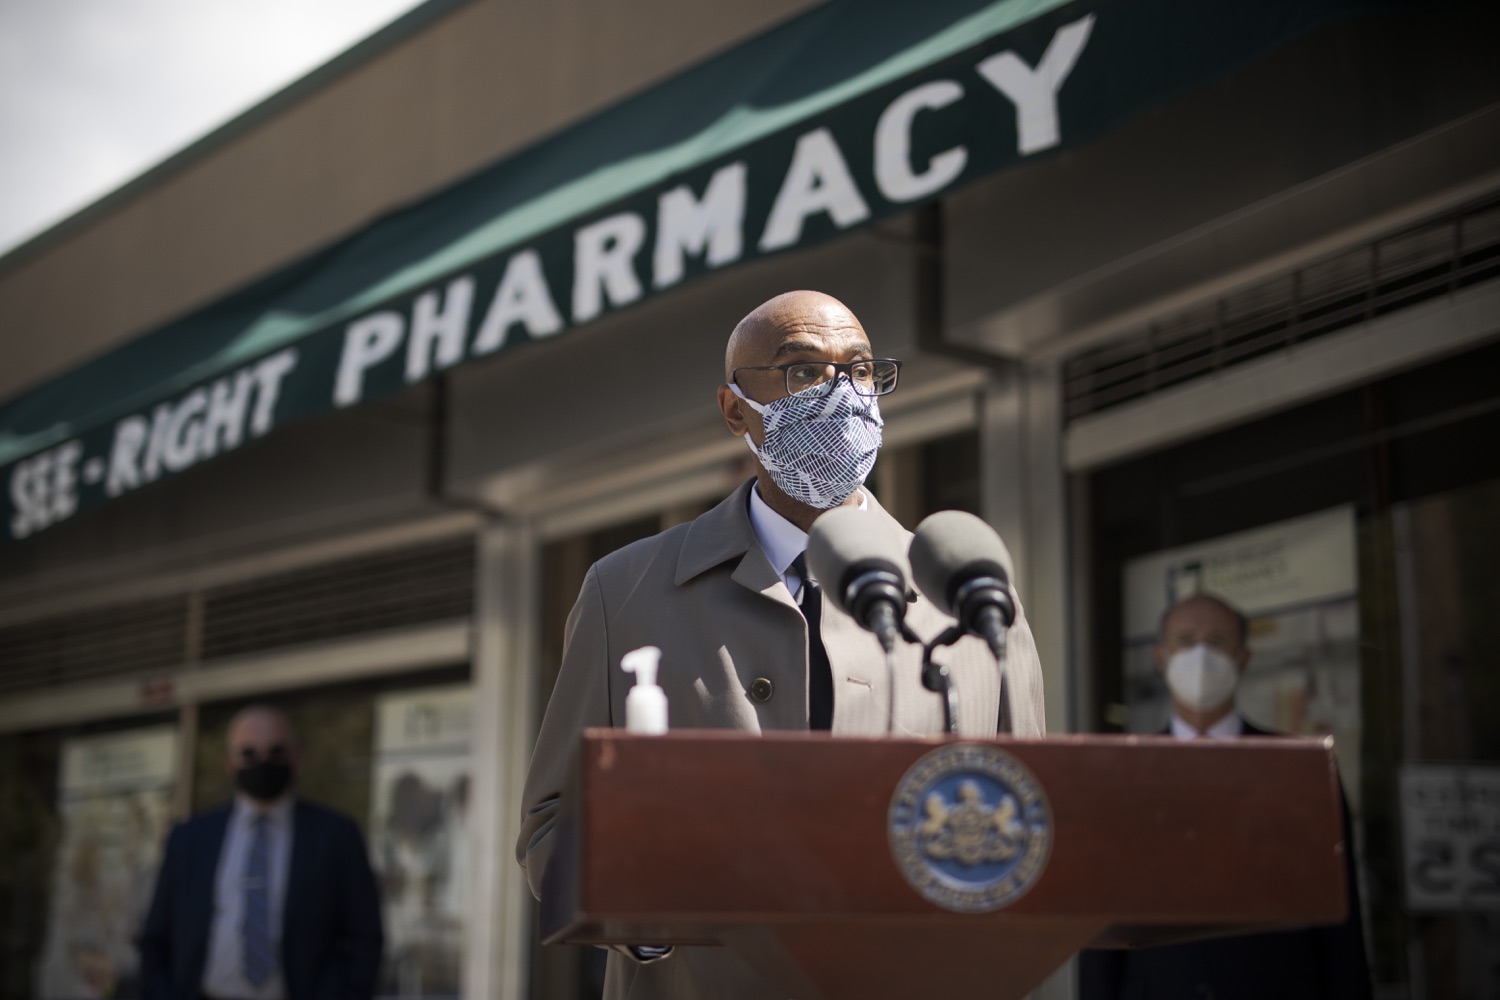 David Saunders, Director, DOHs Office of Health Equity speaking with the press.  Governor Tom Wolf today visited See-Right Pharmacy in Harrisburg to learn more about how the local, neighborhood pharmacy is vaccinating community members and to talk about COVID-19 vaccine hesitancy in Pennsylvania. Harrisburg, PA  April 22, 2021<br><a href="https://filesource.amperwave.net/commonwealthofpa/photo/18704_gov_seeRight_dz_002.jpg" target="_blank">⇣ Download Photo</a>